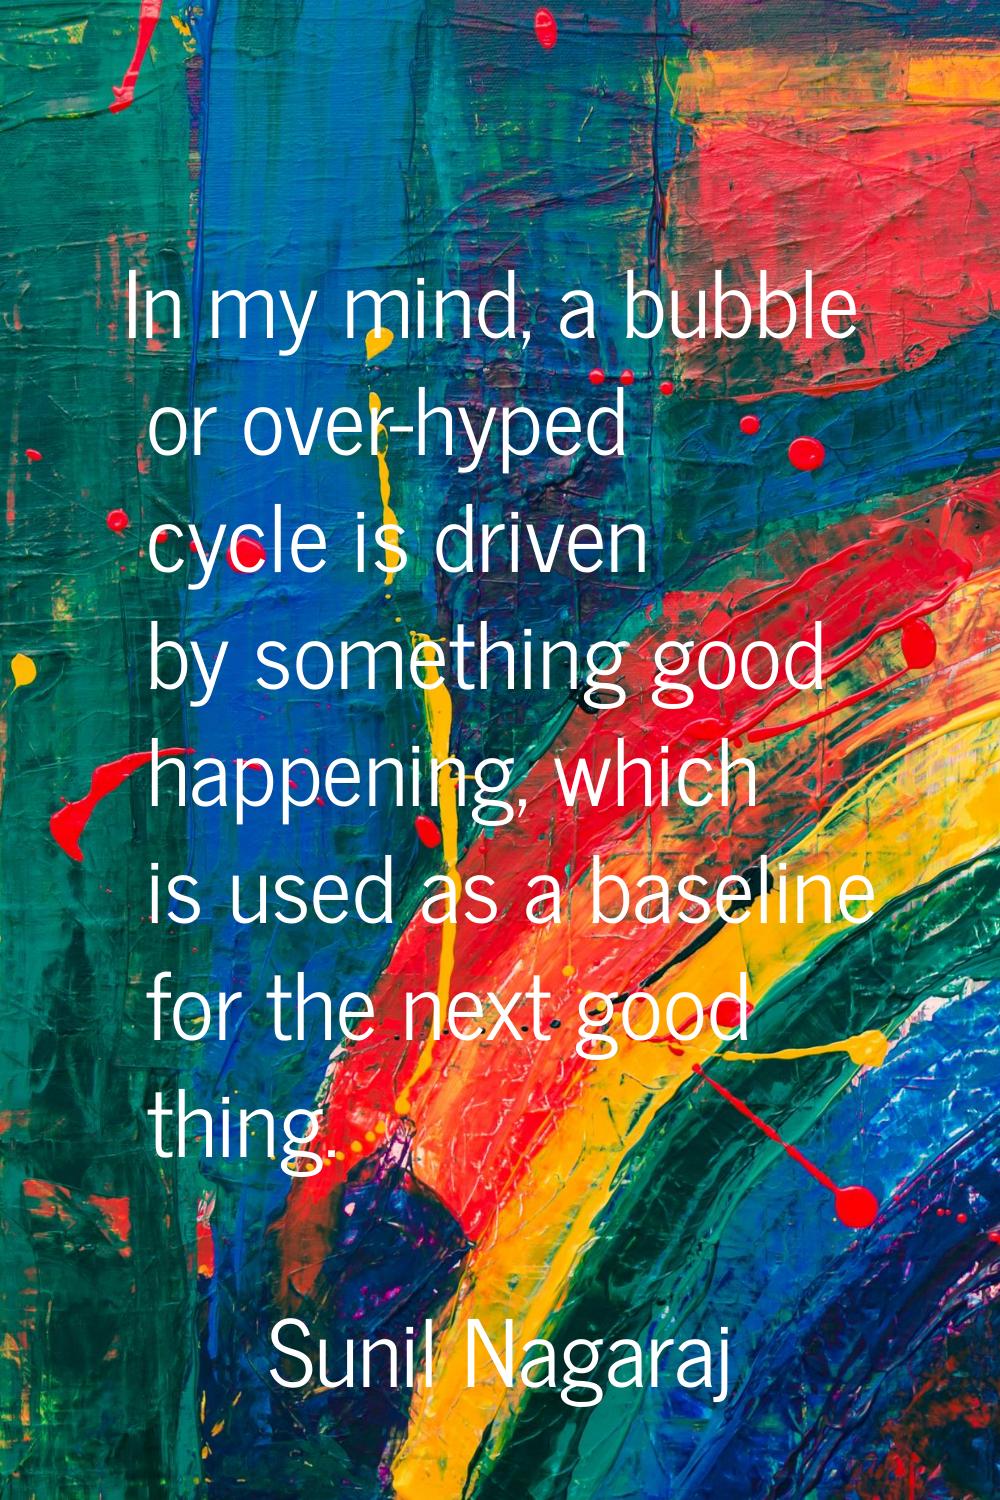 In my mind, a bubble or over-hyped cycle is driven by something good happening, which is used as a 